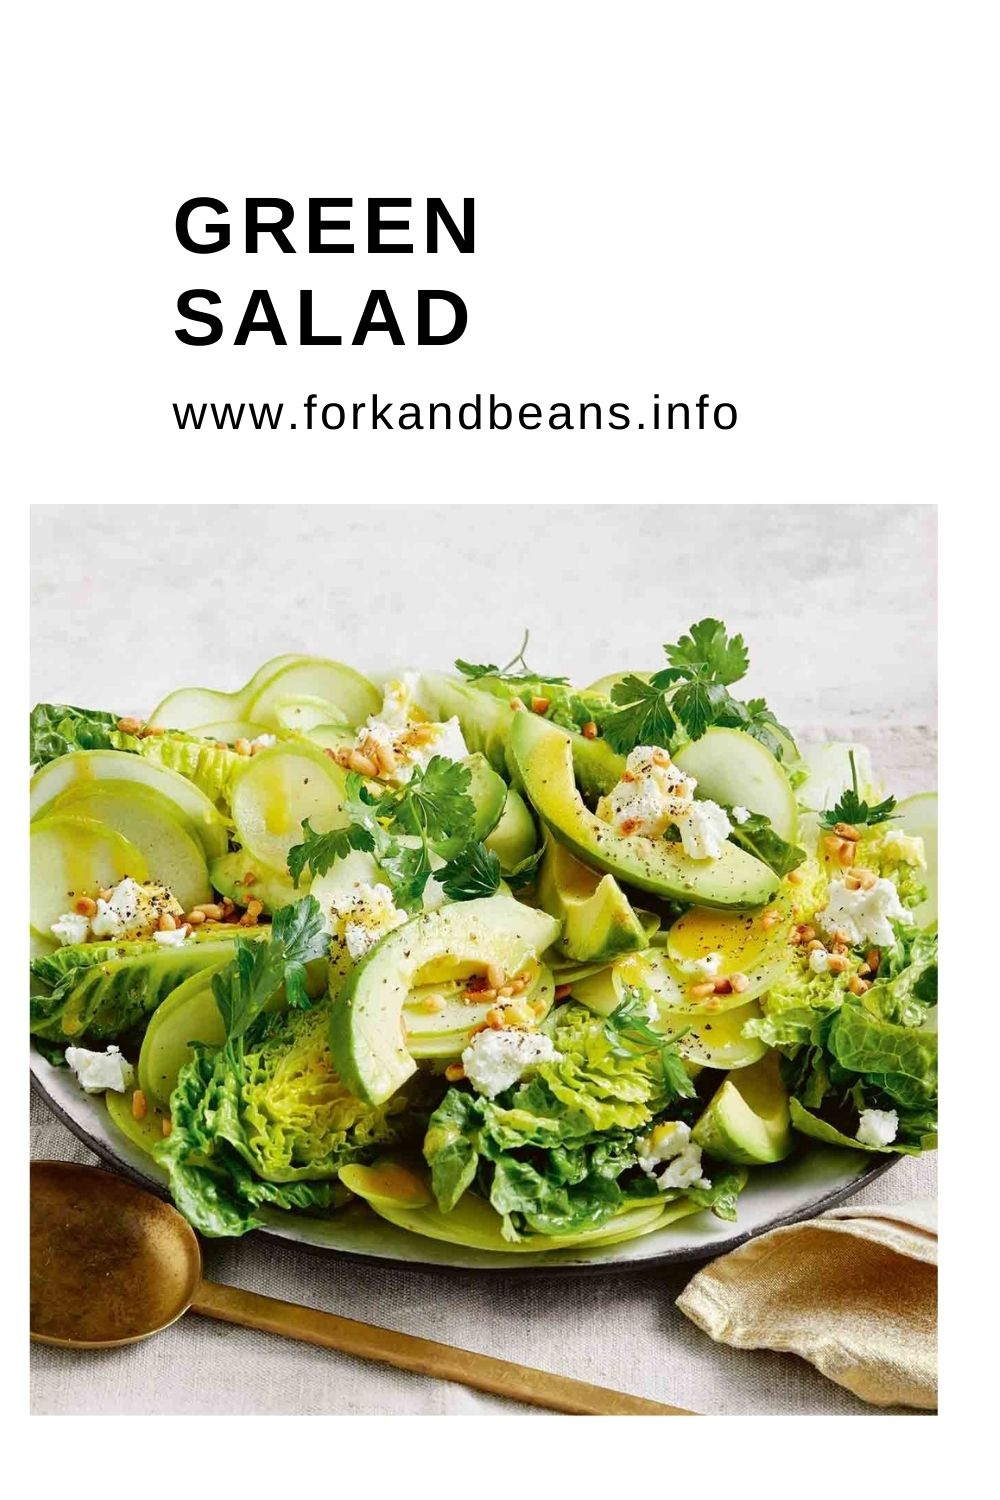 Super green salad with avocado, apple and goat's cheese